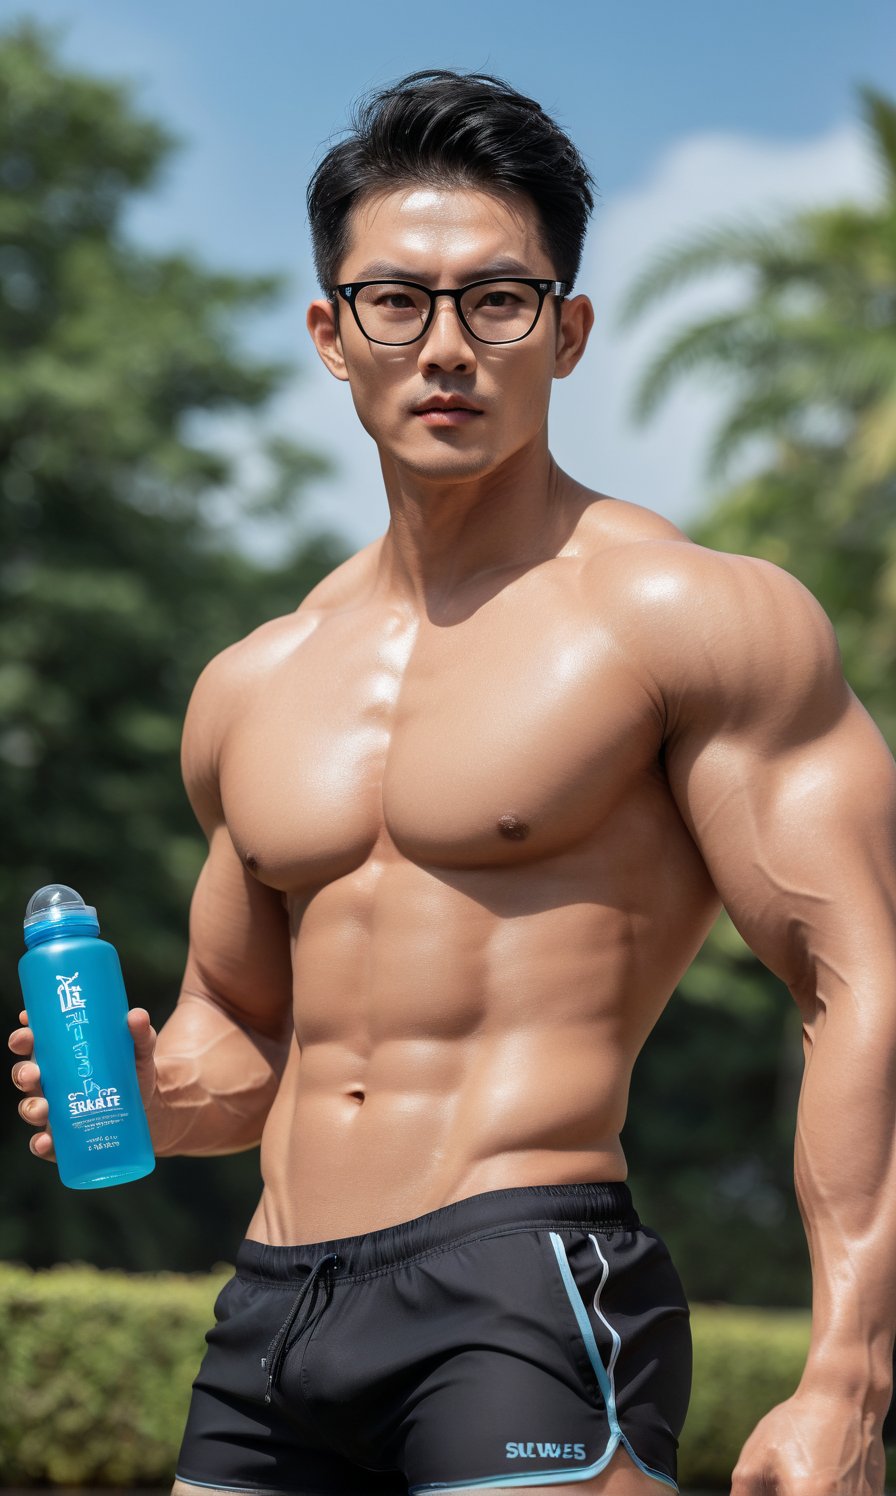 a statuesque asia man ,stands tall, his muscular physique glistening with petroleum oil that accentuates every contour,striking eyes,   glasses, lock at camera, full healthy lips , Stubble, black hair, bathing_suit, holding 
Protein shaker with "Dream Shape" printed on it, dynamic pose that seems to defy gravity,perfect split lighting,perfect proportions face , blurred garden backdrop 